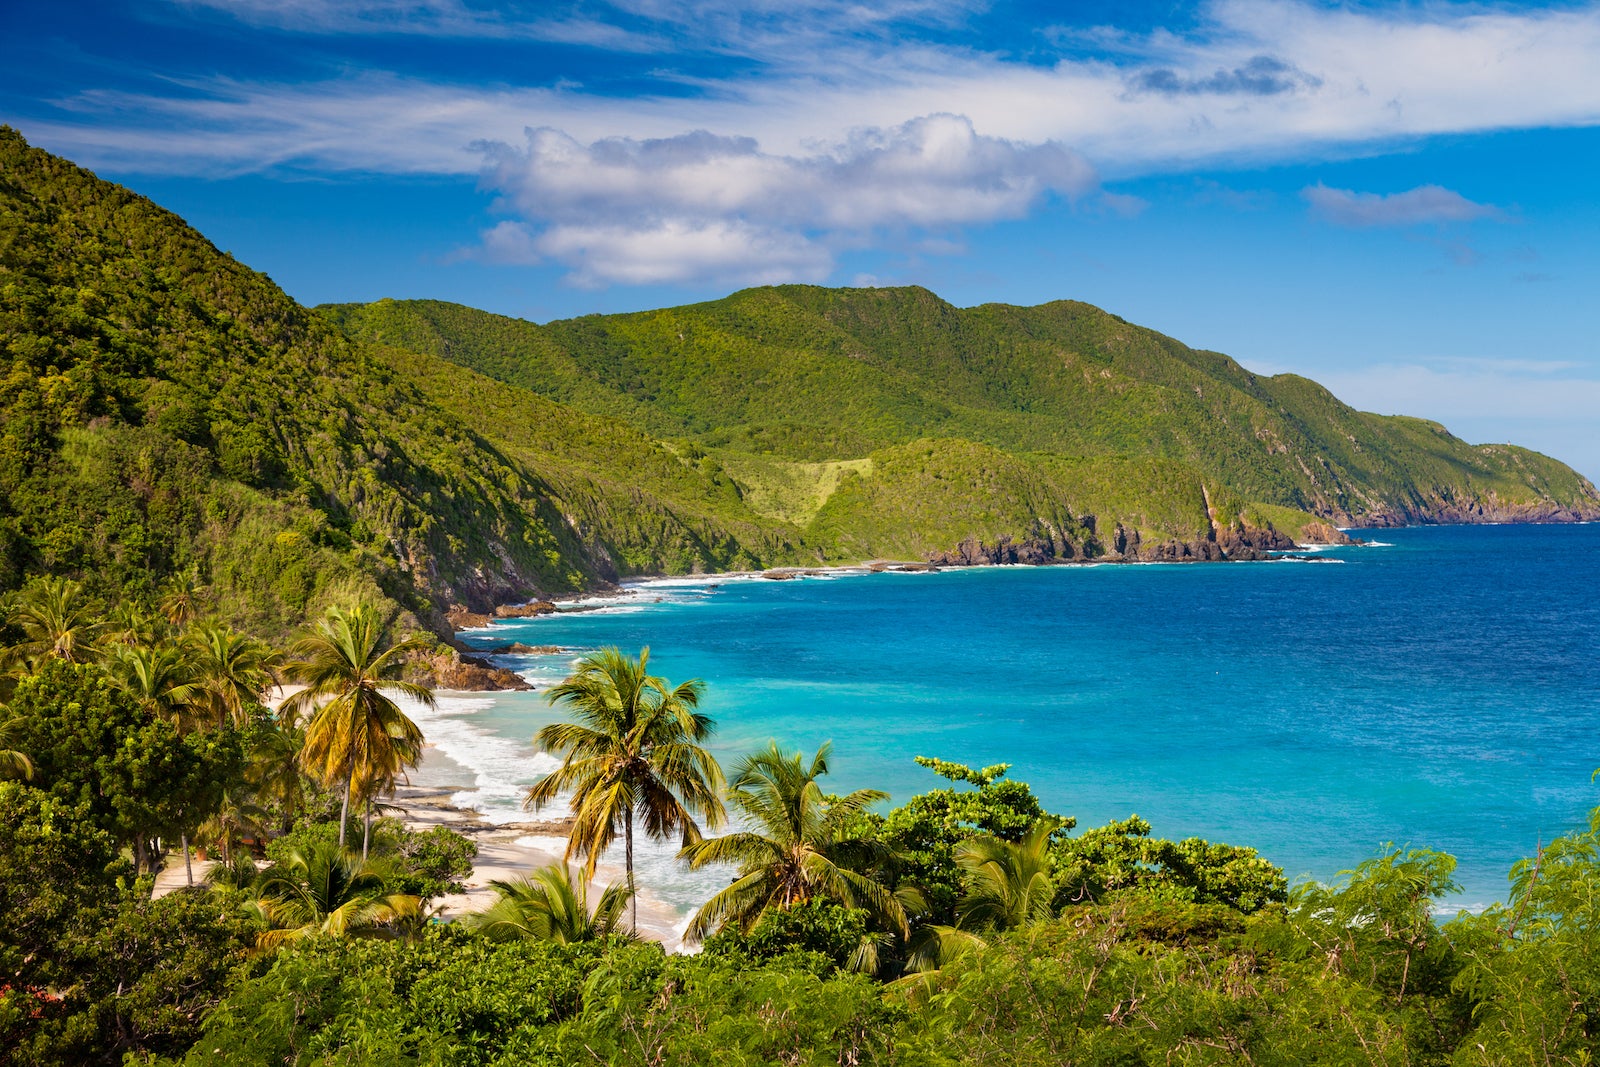 Fly to the US Virgin Islands this winter for as low as $228 round-trip